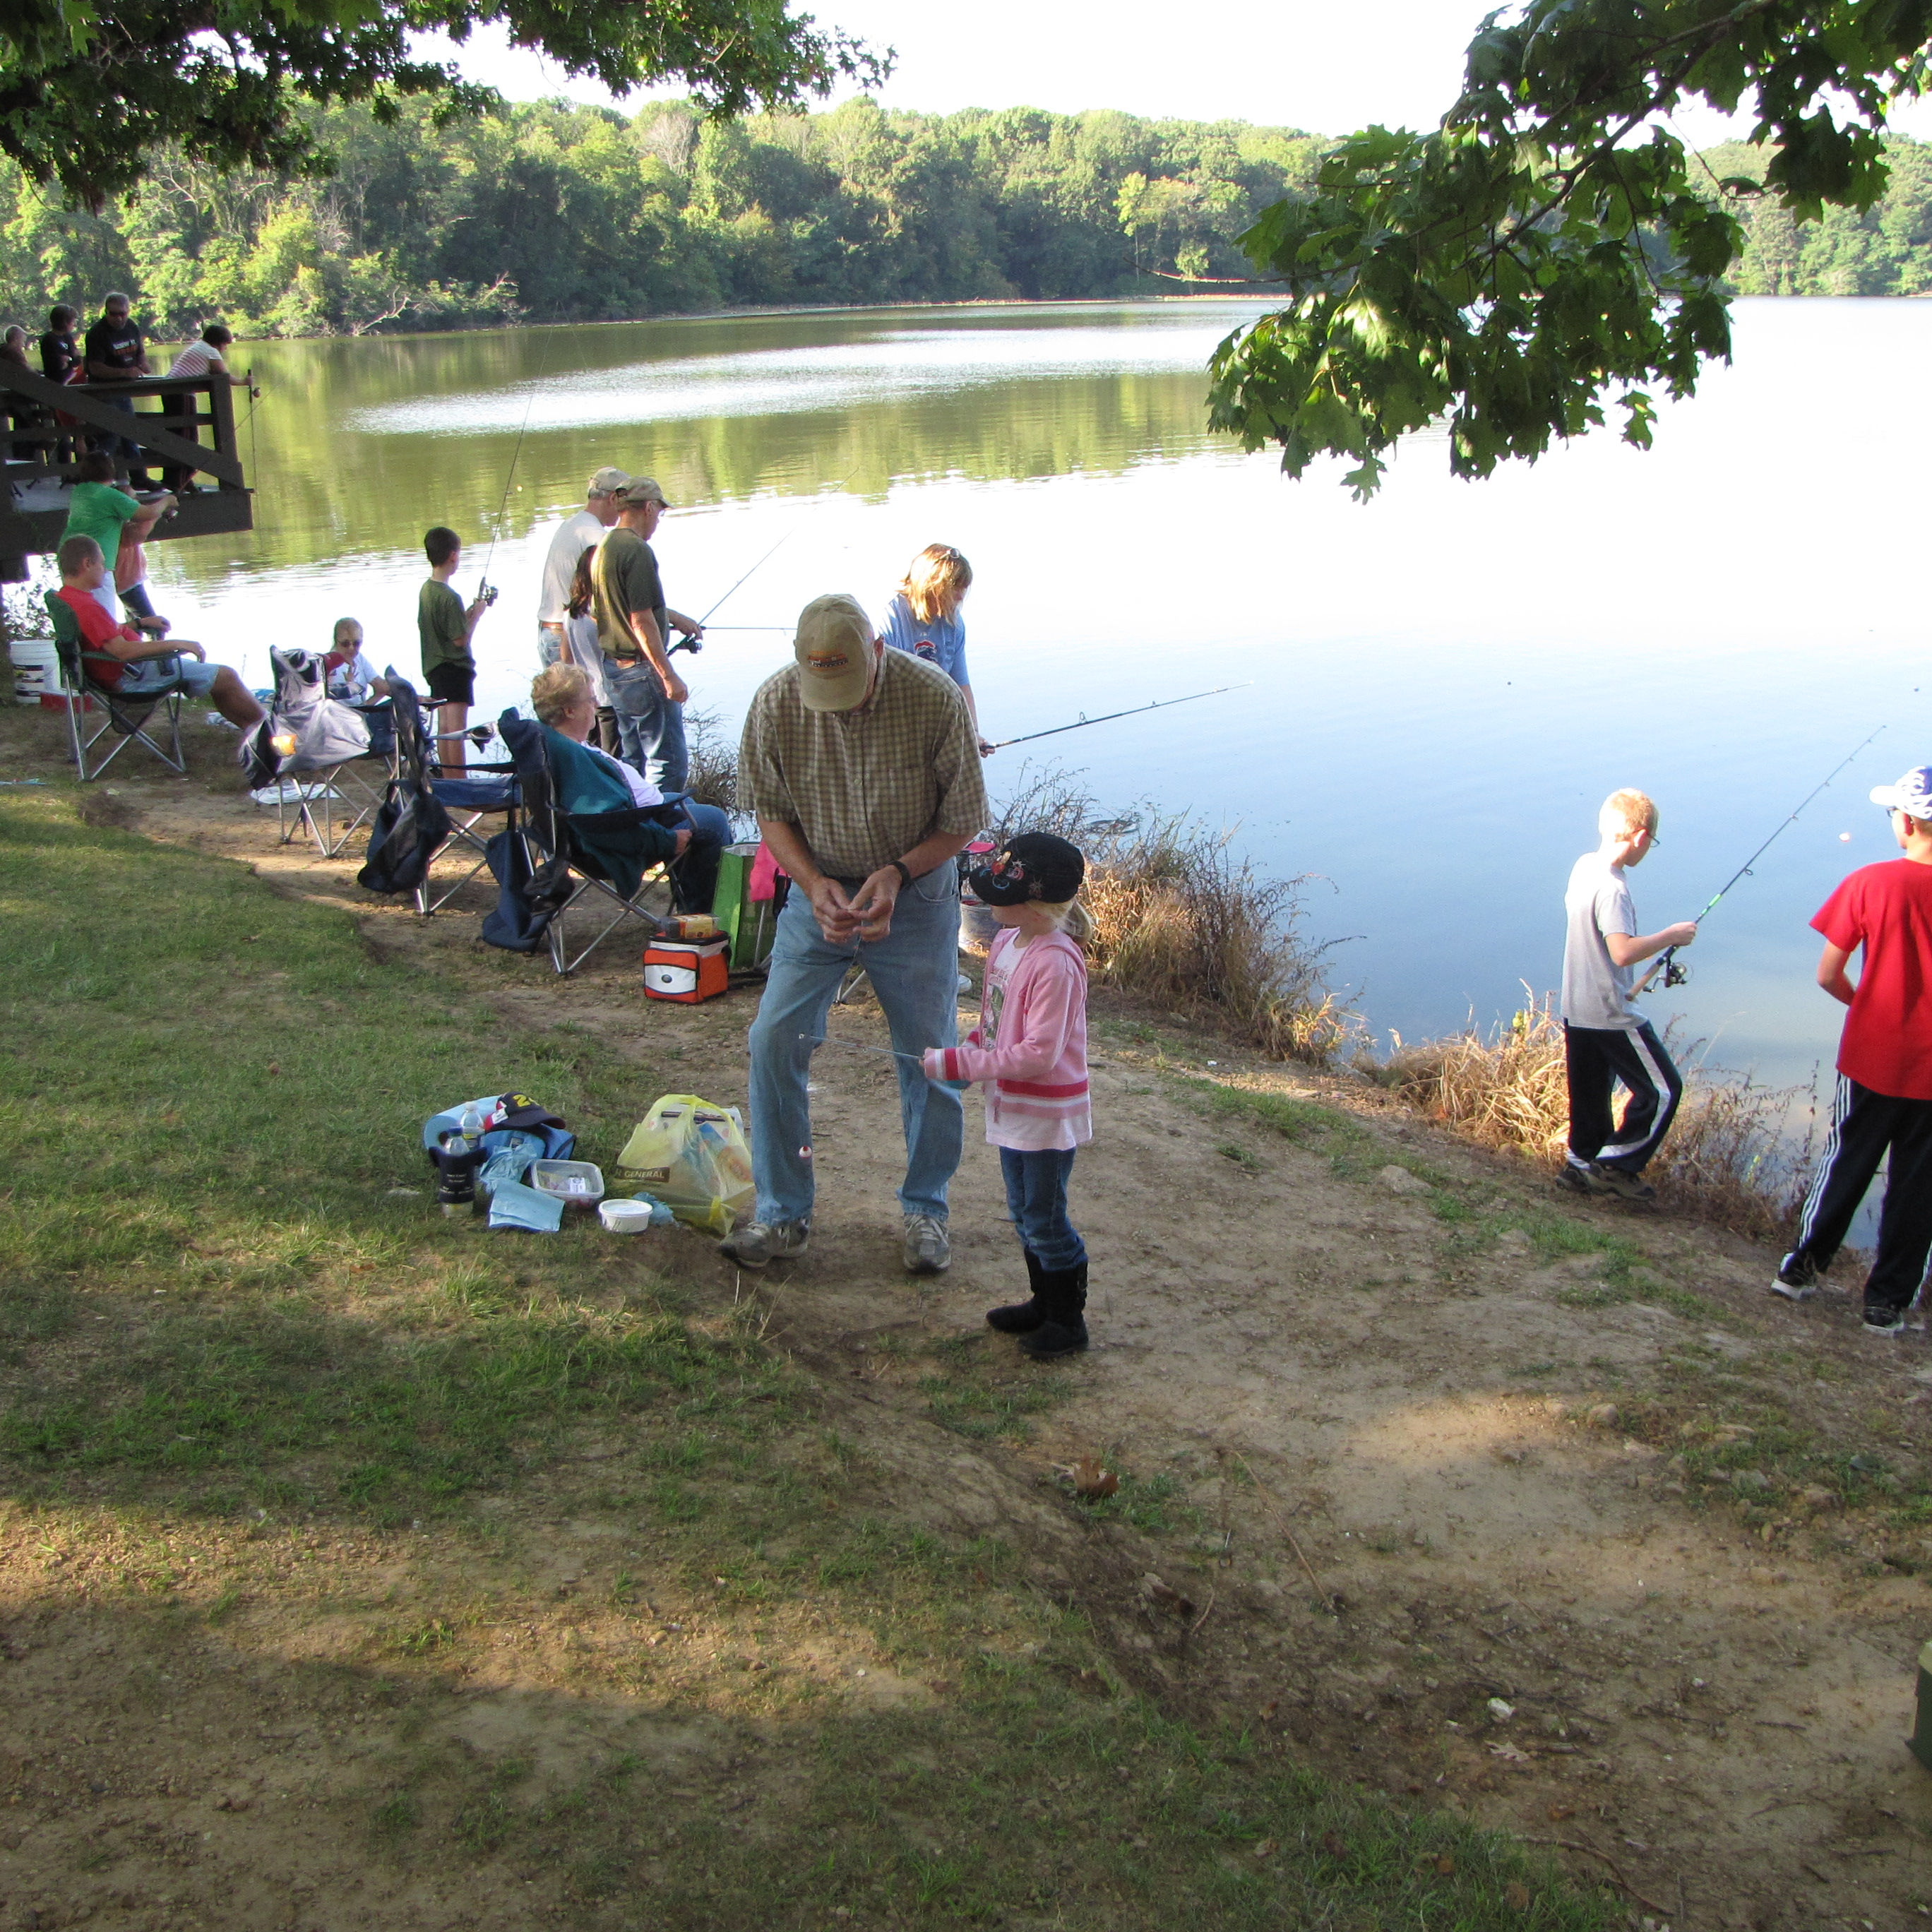 people line the bank of a lake holding fishing poles